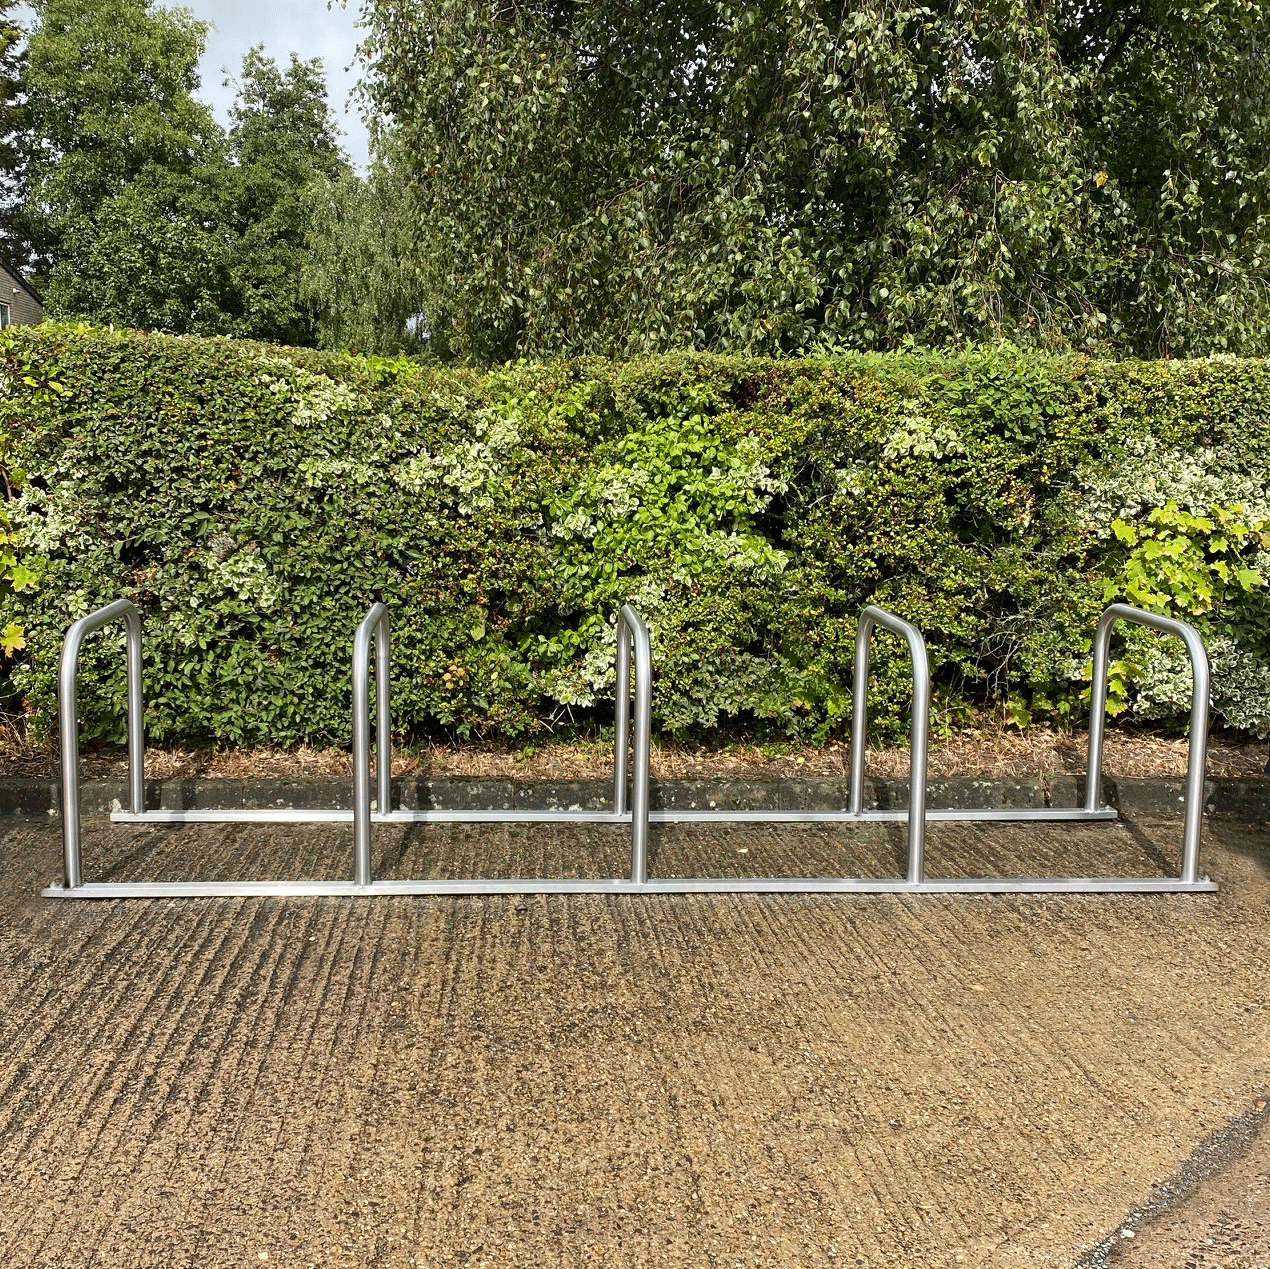 Sheffield Toastrack Cycle Rack - 48mm Dia.